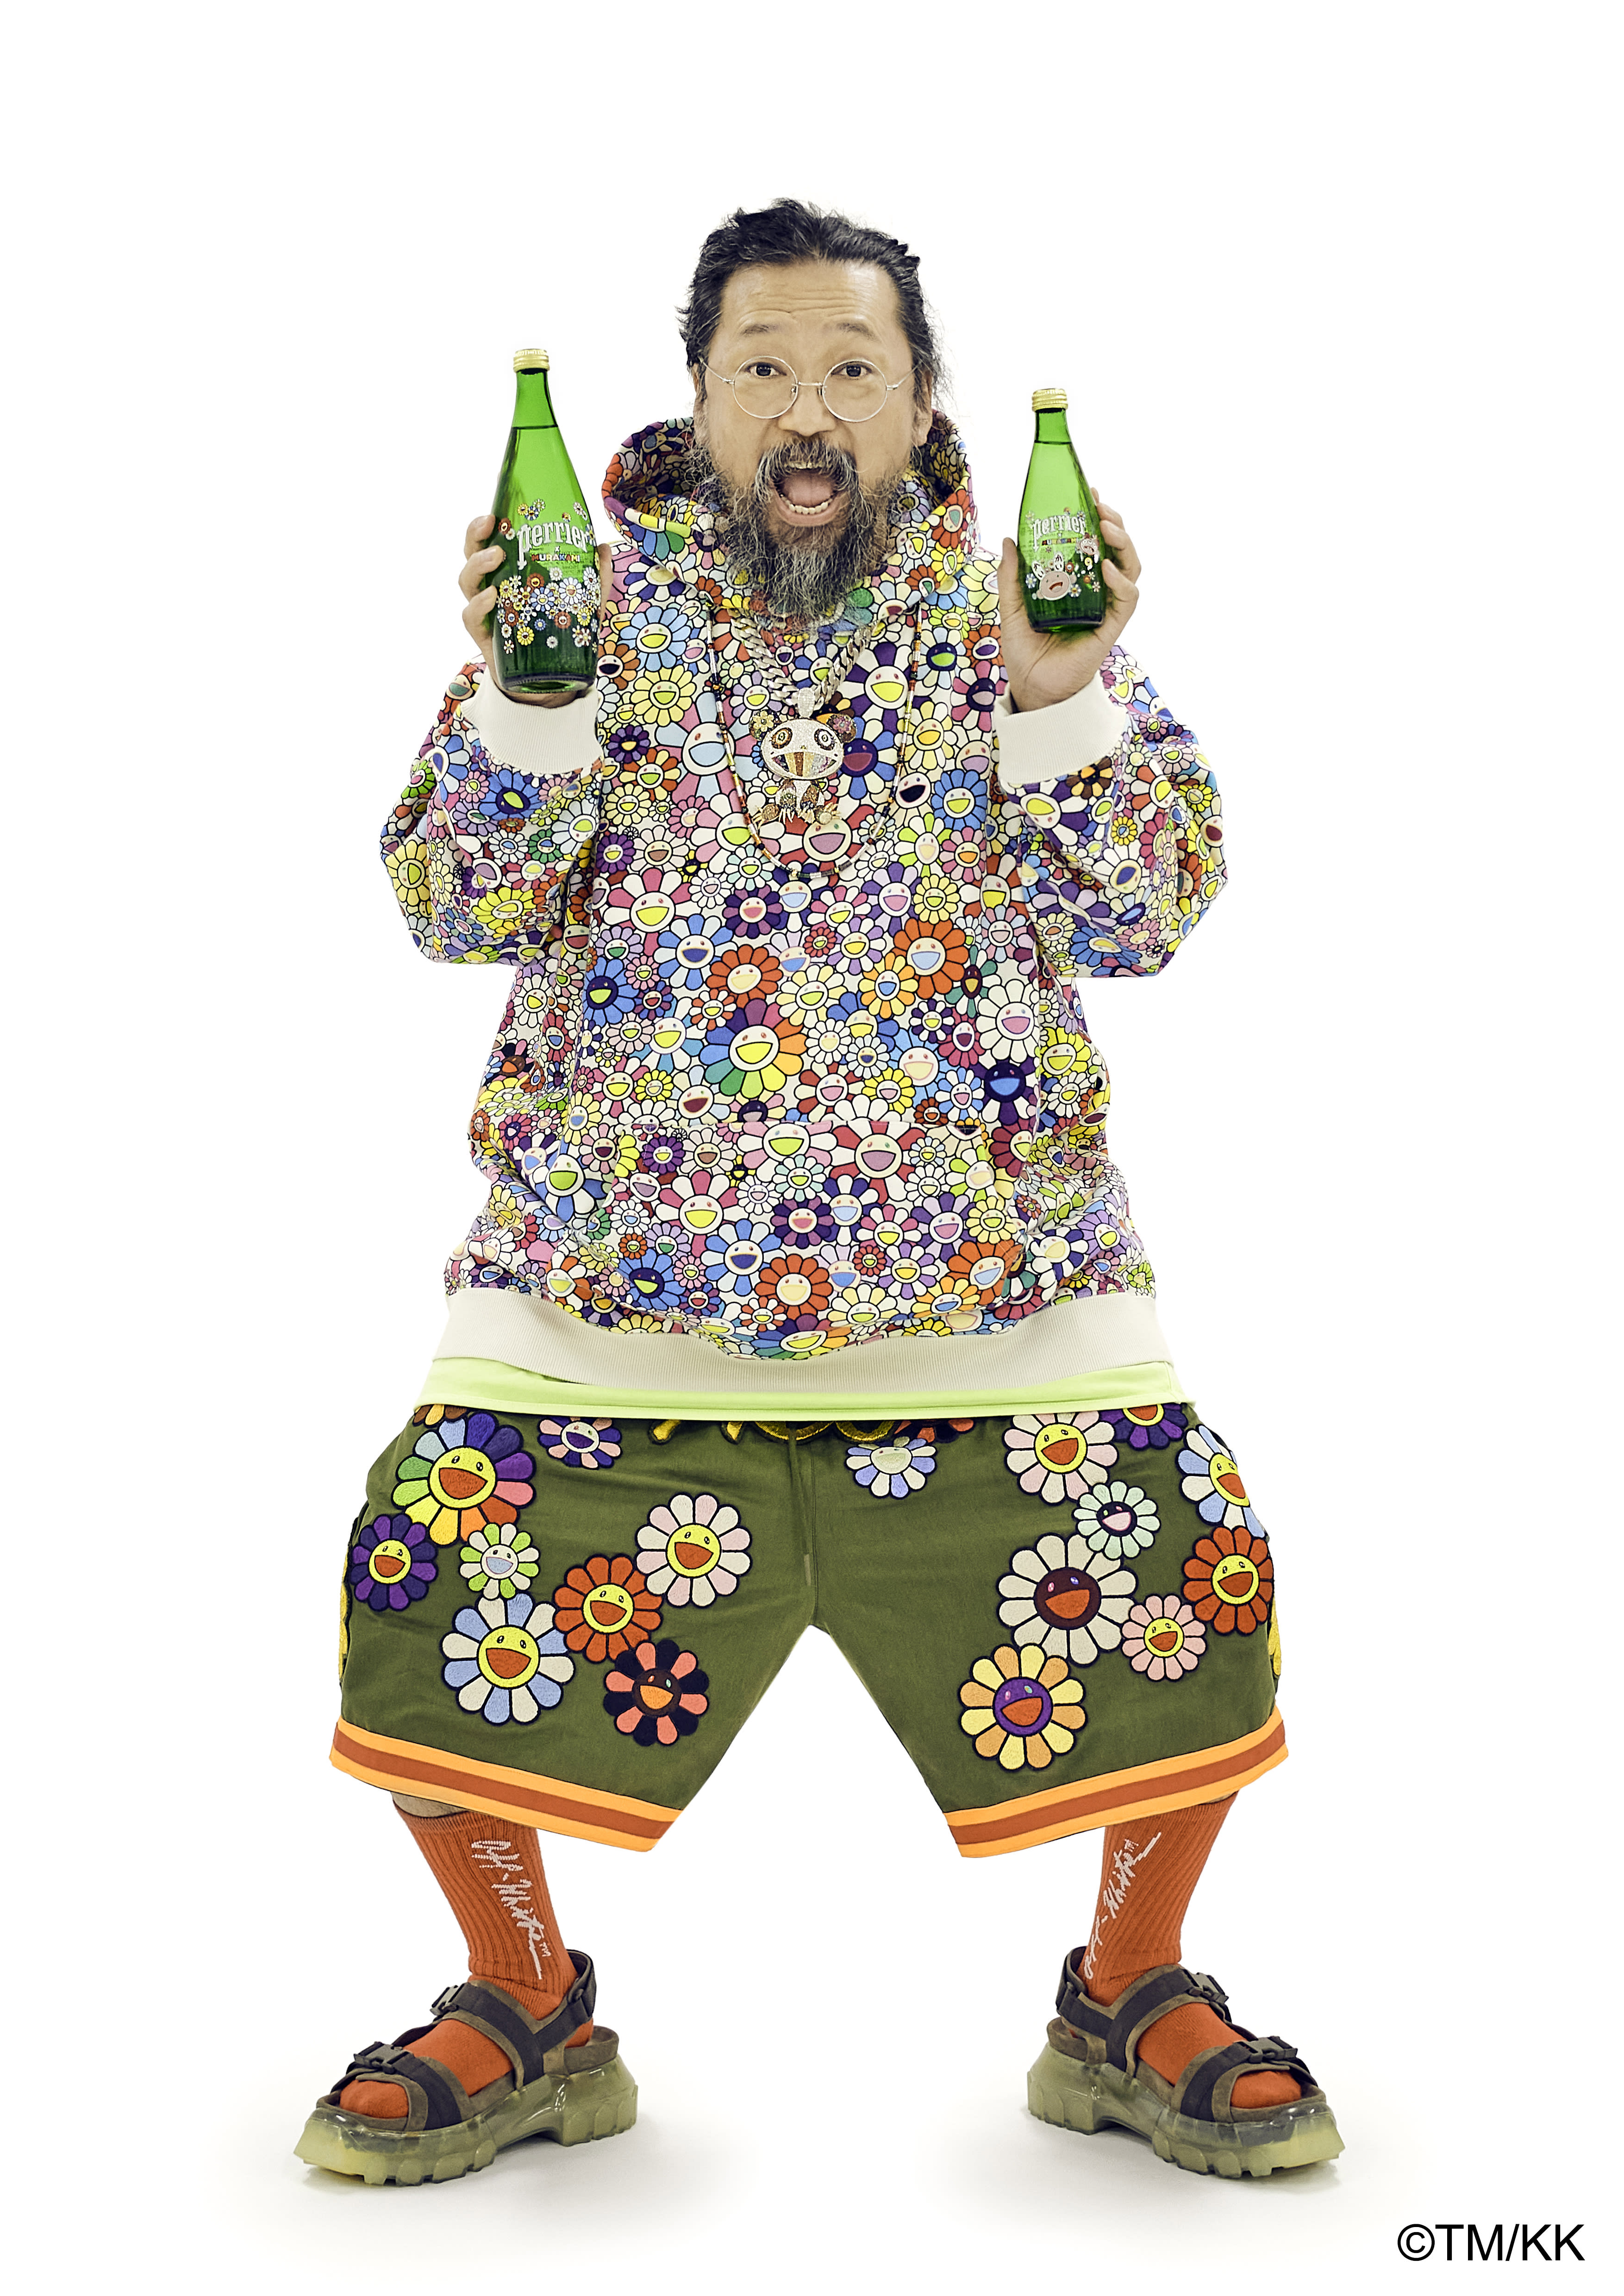 PERRIER® announces collaboration with Takashi Murakami